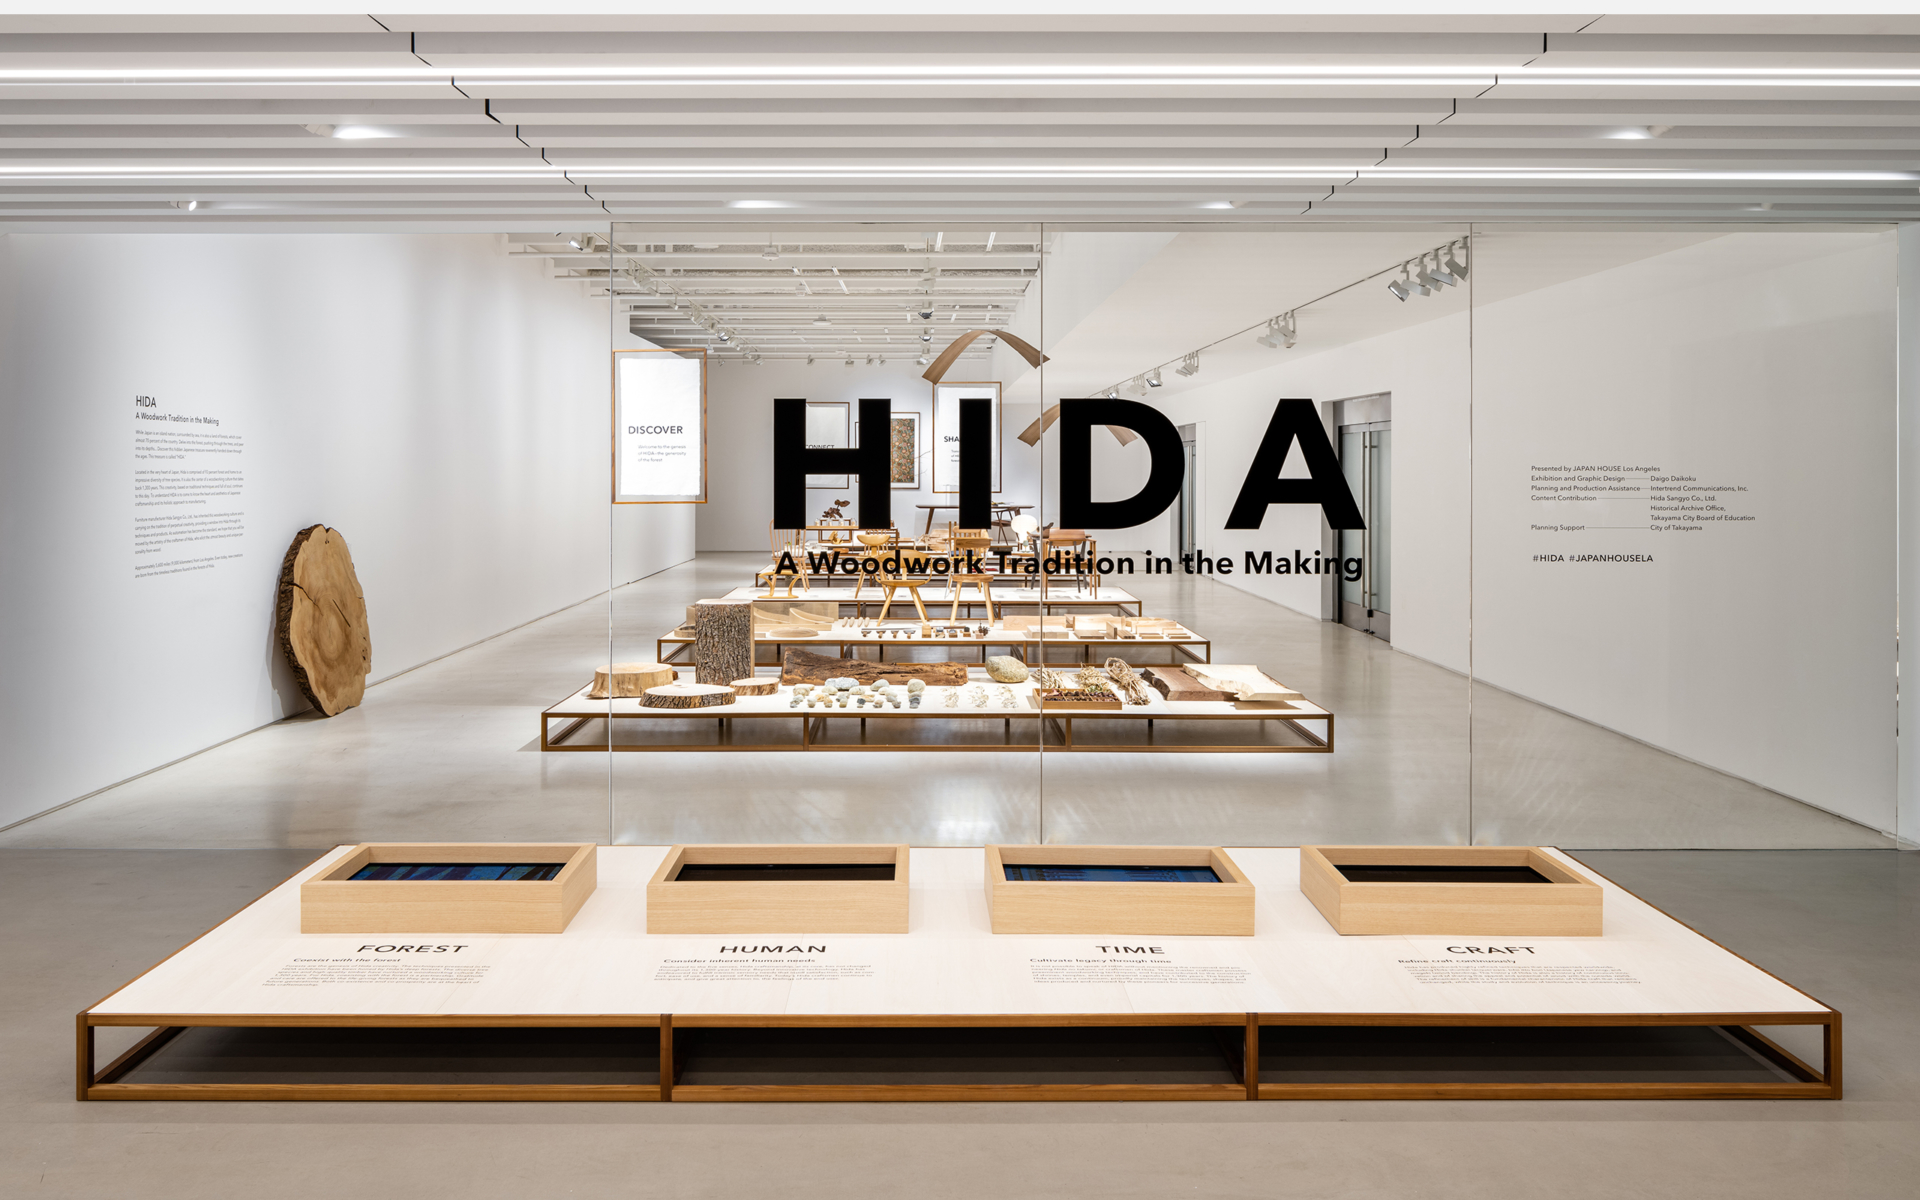 HIDA: A Woodwork Tradition in the Making